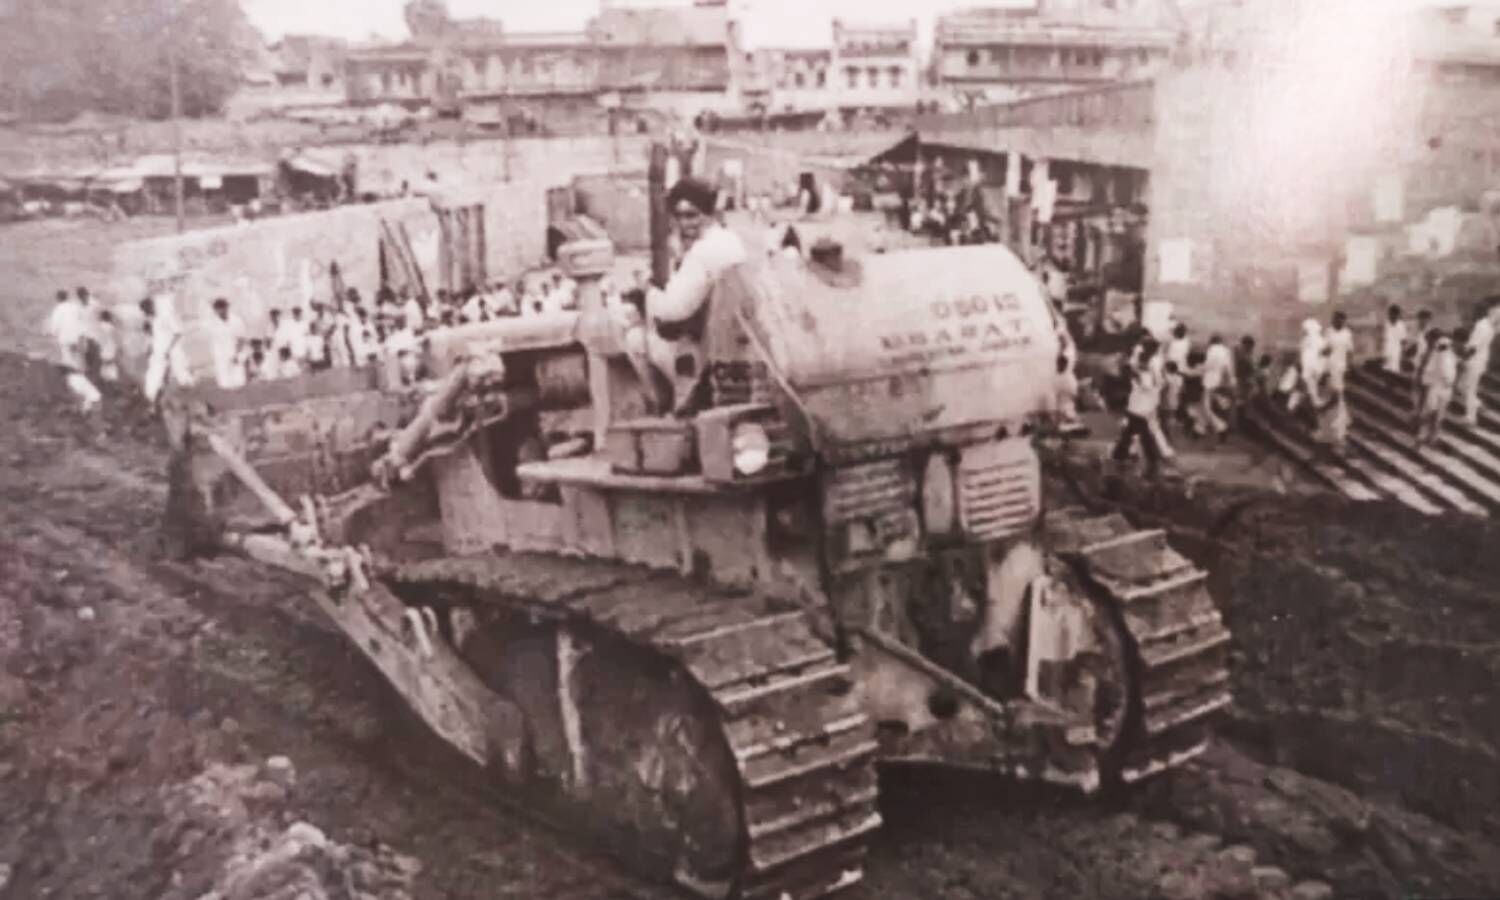 Delhi Bulldozer News: 46 years ago, when the bulldozers of the Congress government wreaked havoc at the Turkman Gate of Delhi, know the full story